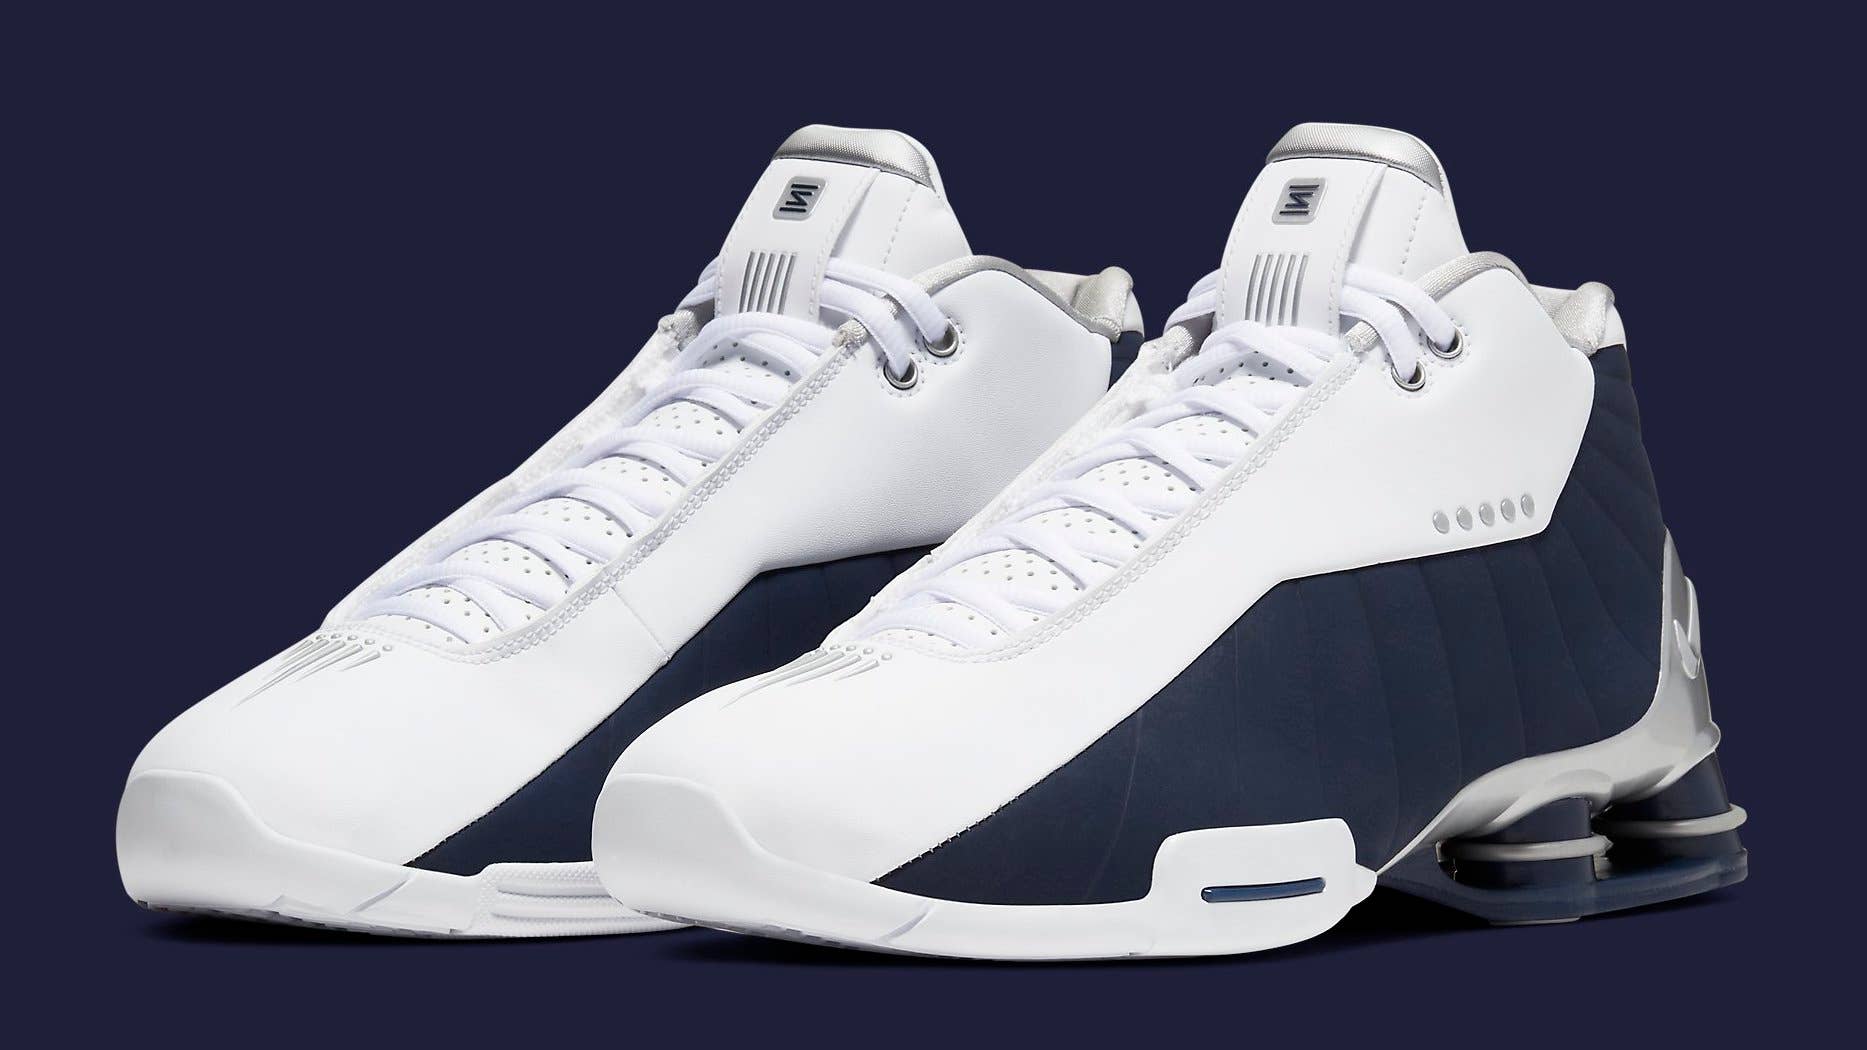 Carter's Shox BB4 Sneakers Is Returning Soon | Complex